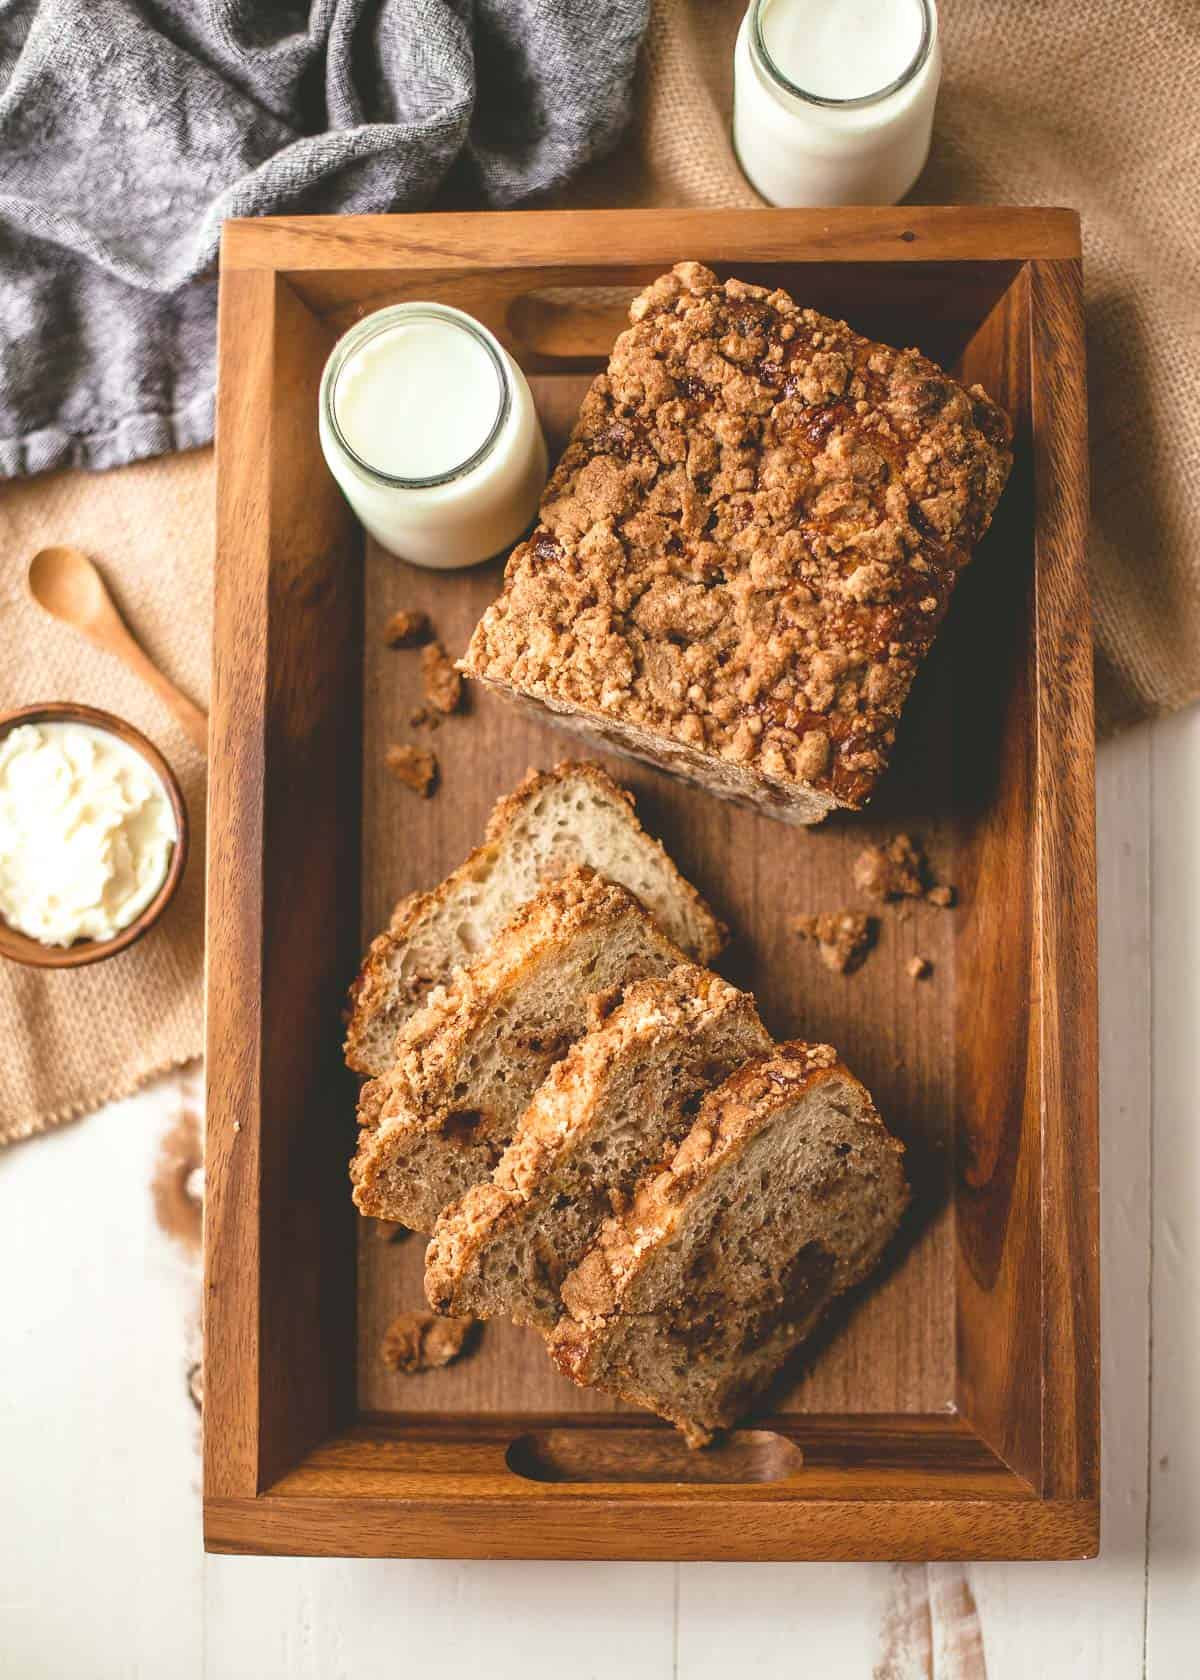 cinnamon crunch bread slices on a wooden tray